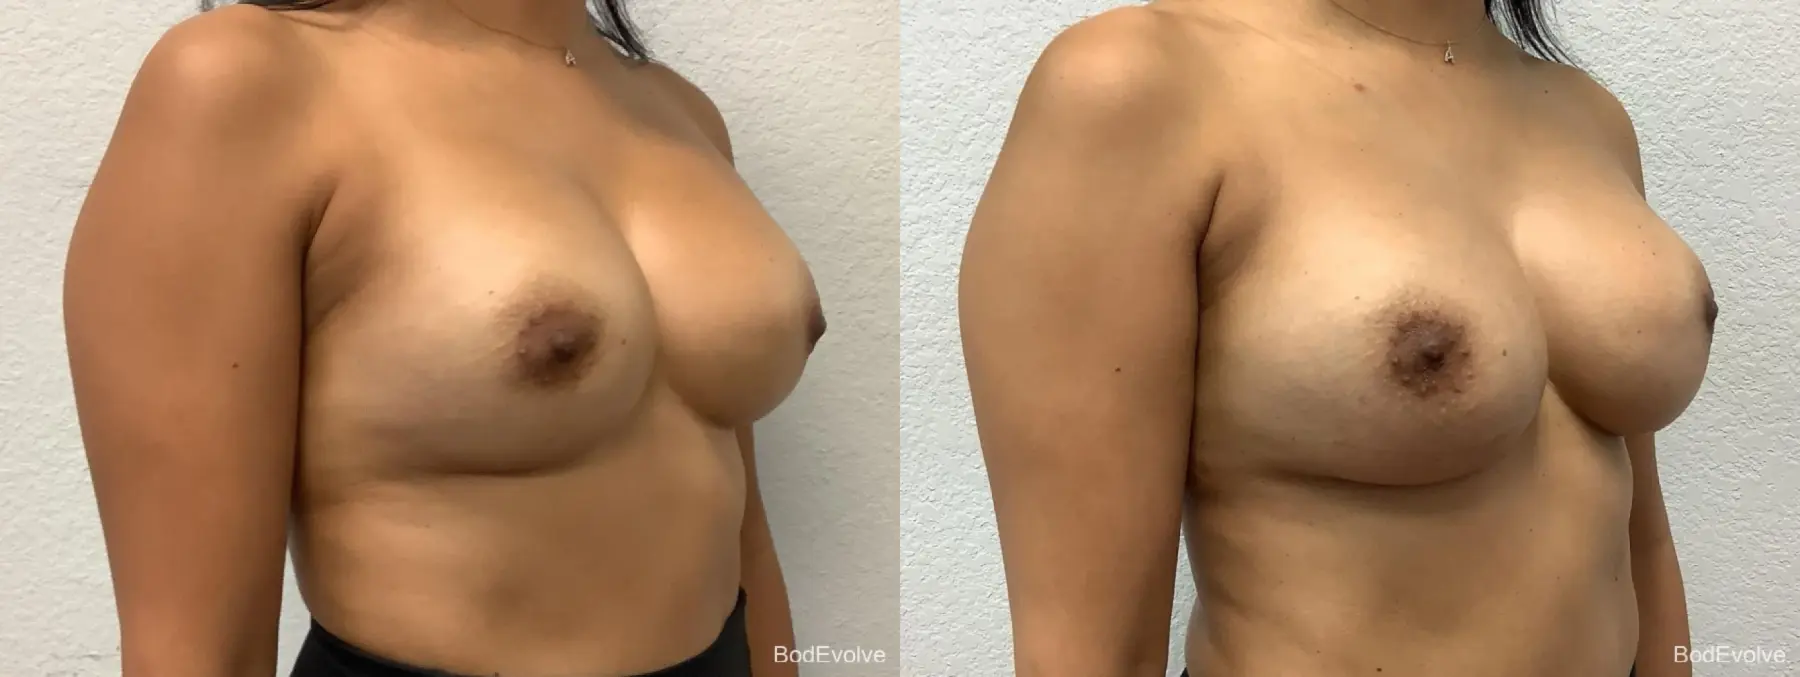 Breast Revision: Patient 2 - Before and After 4